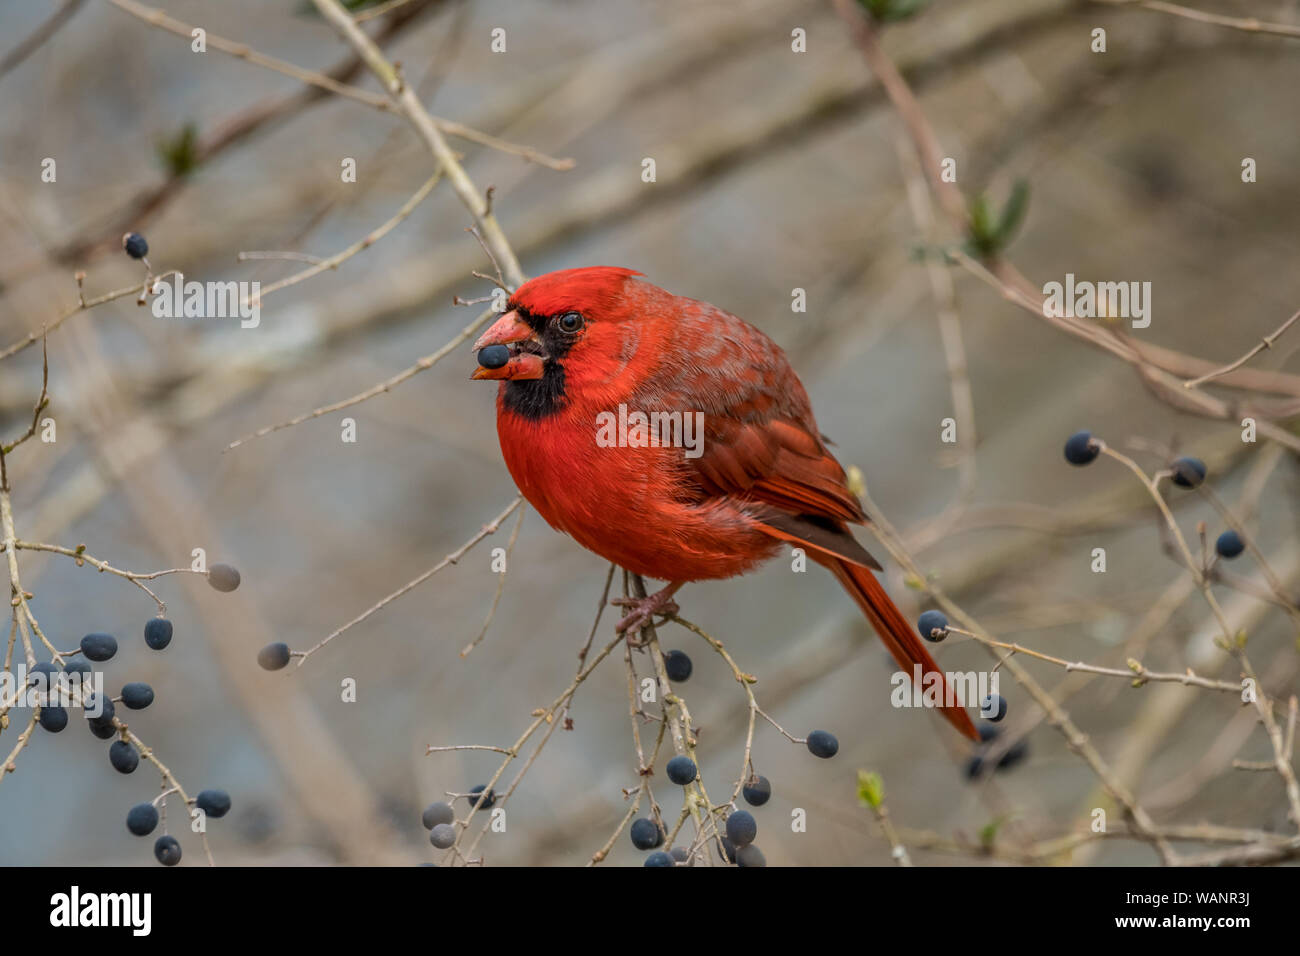 A red cardinal bird on a tree branch eating berries in the winter Stock Photo